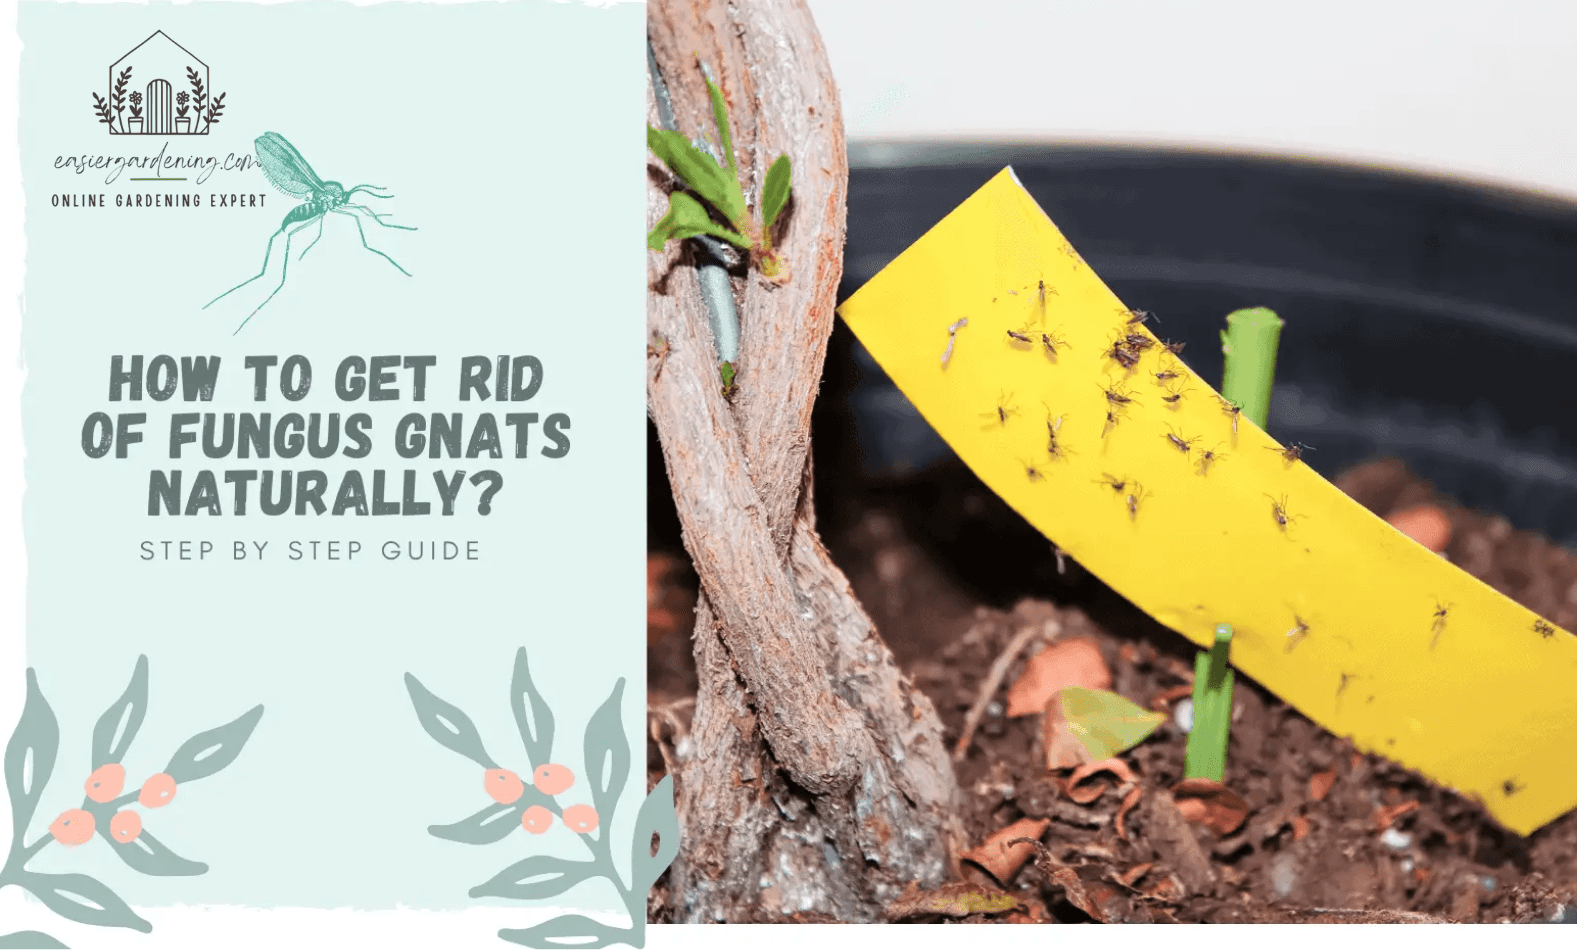 How to get Rid of Fungus Gnats Naturally?